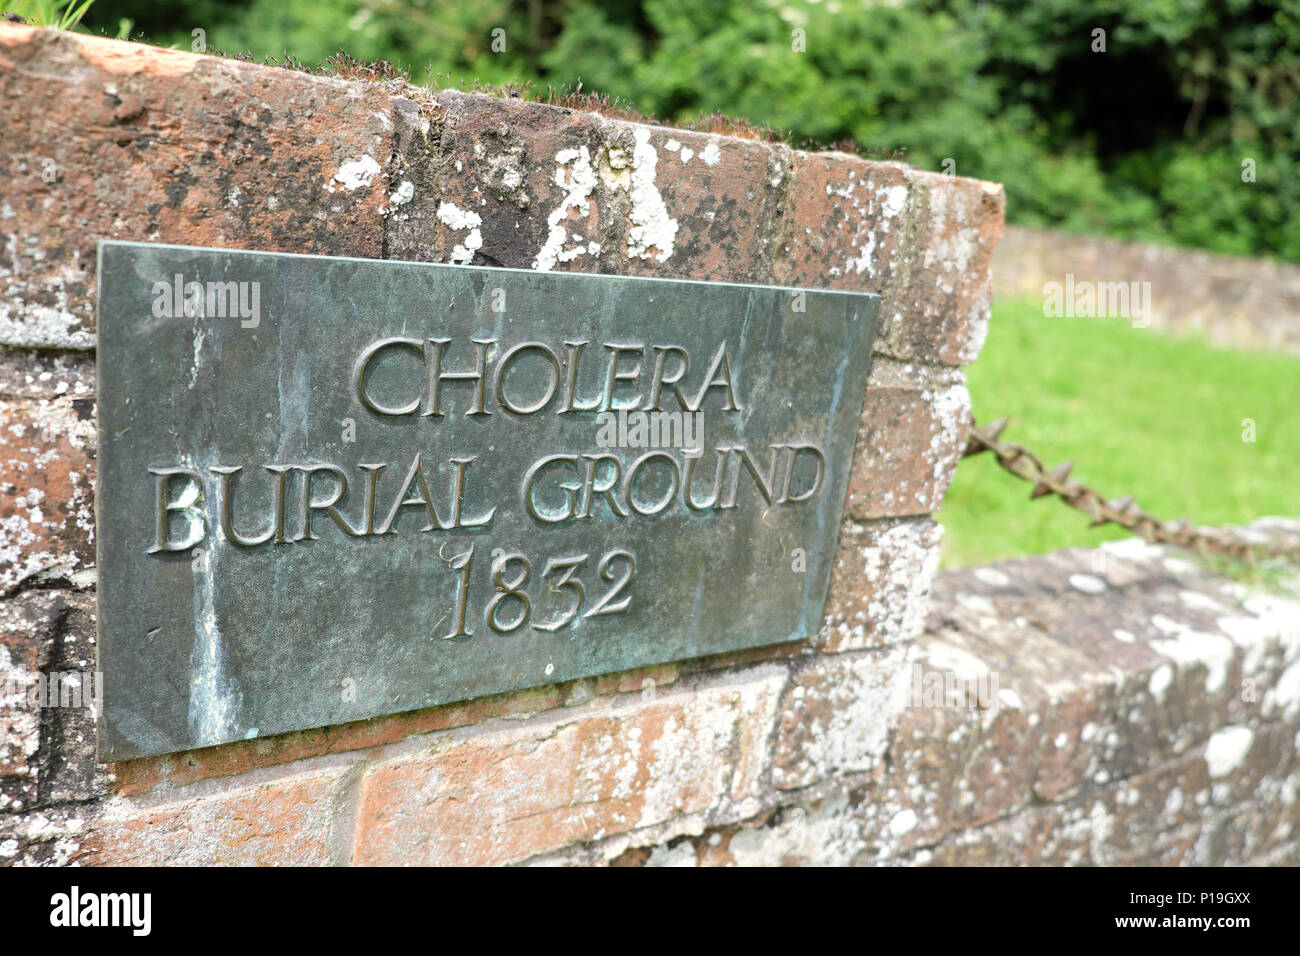 Cholera Burial Ground outside the village of Upton on Severn in Worcestershire UK dating from 1832 Stock Photo